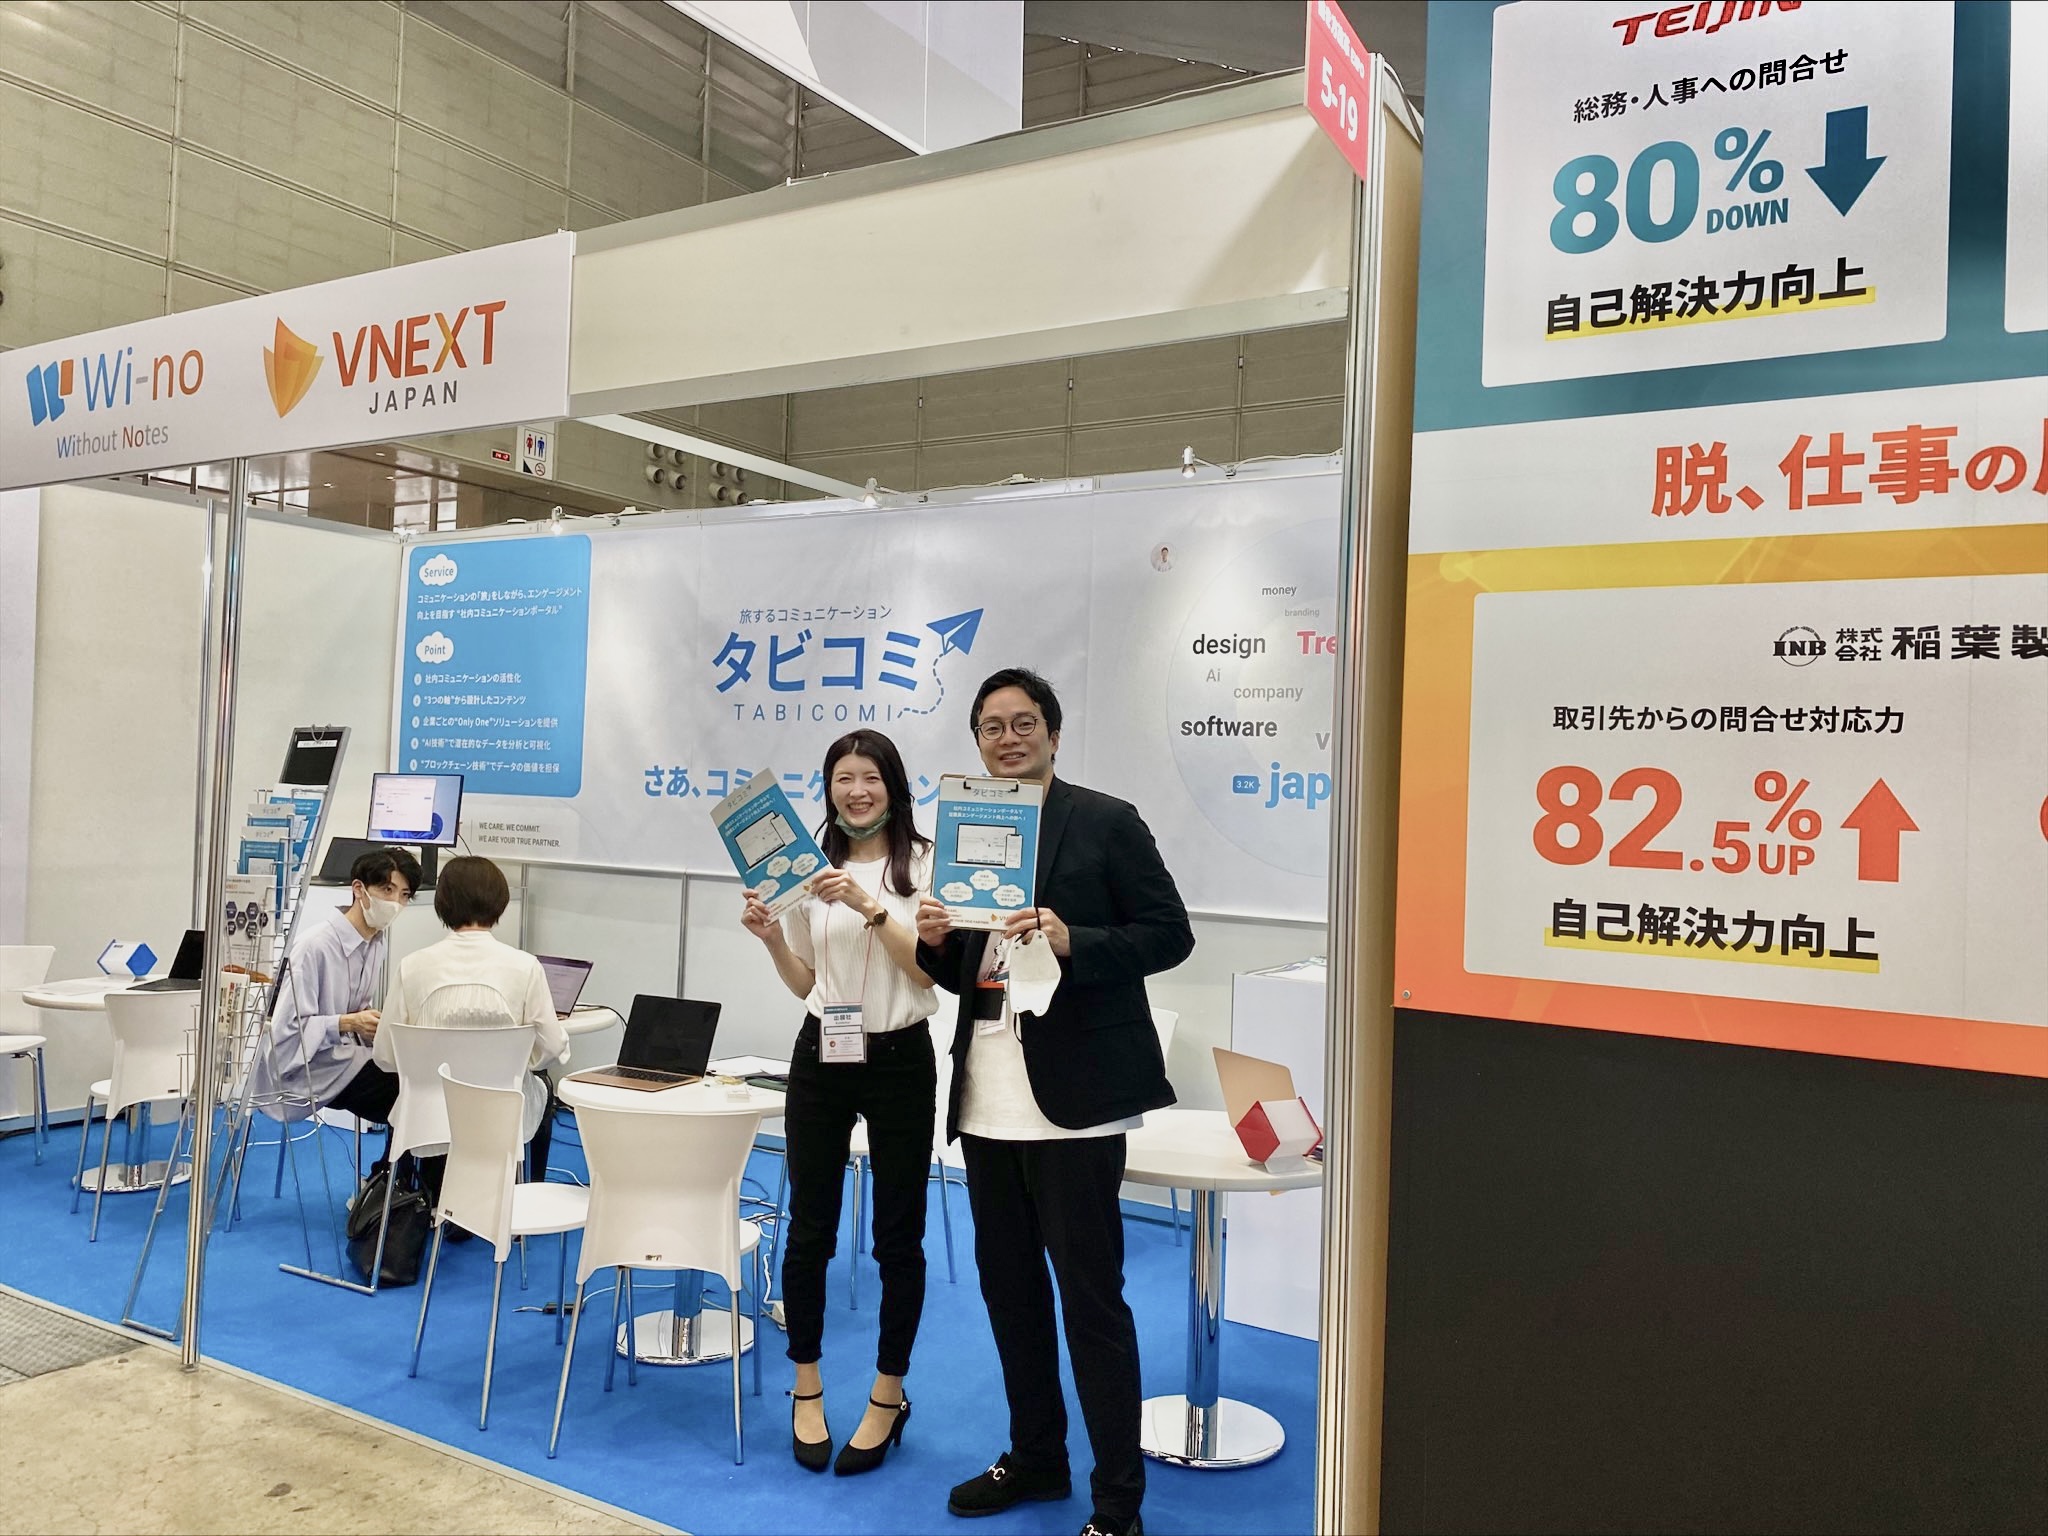 VNEXT HR EXPO 2